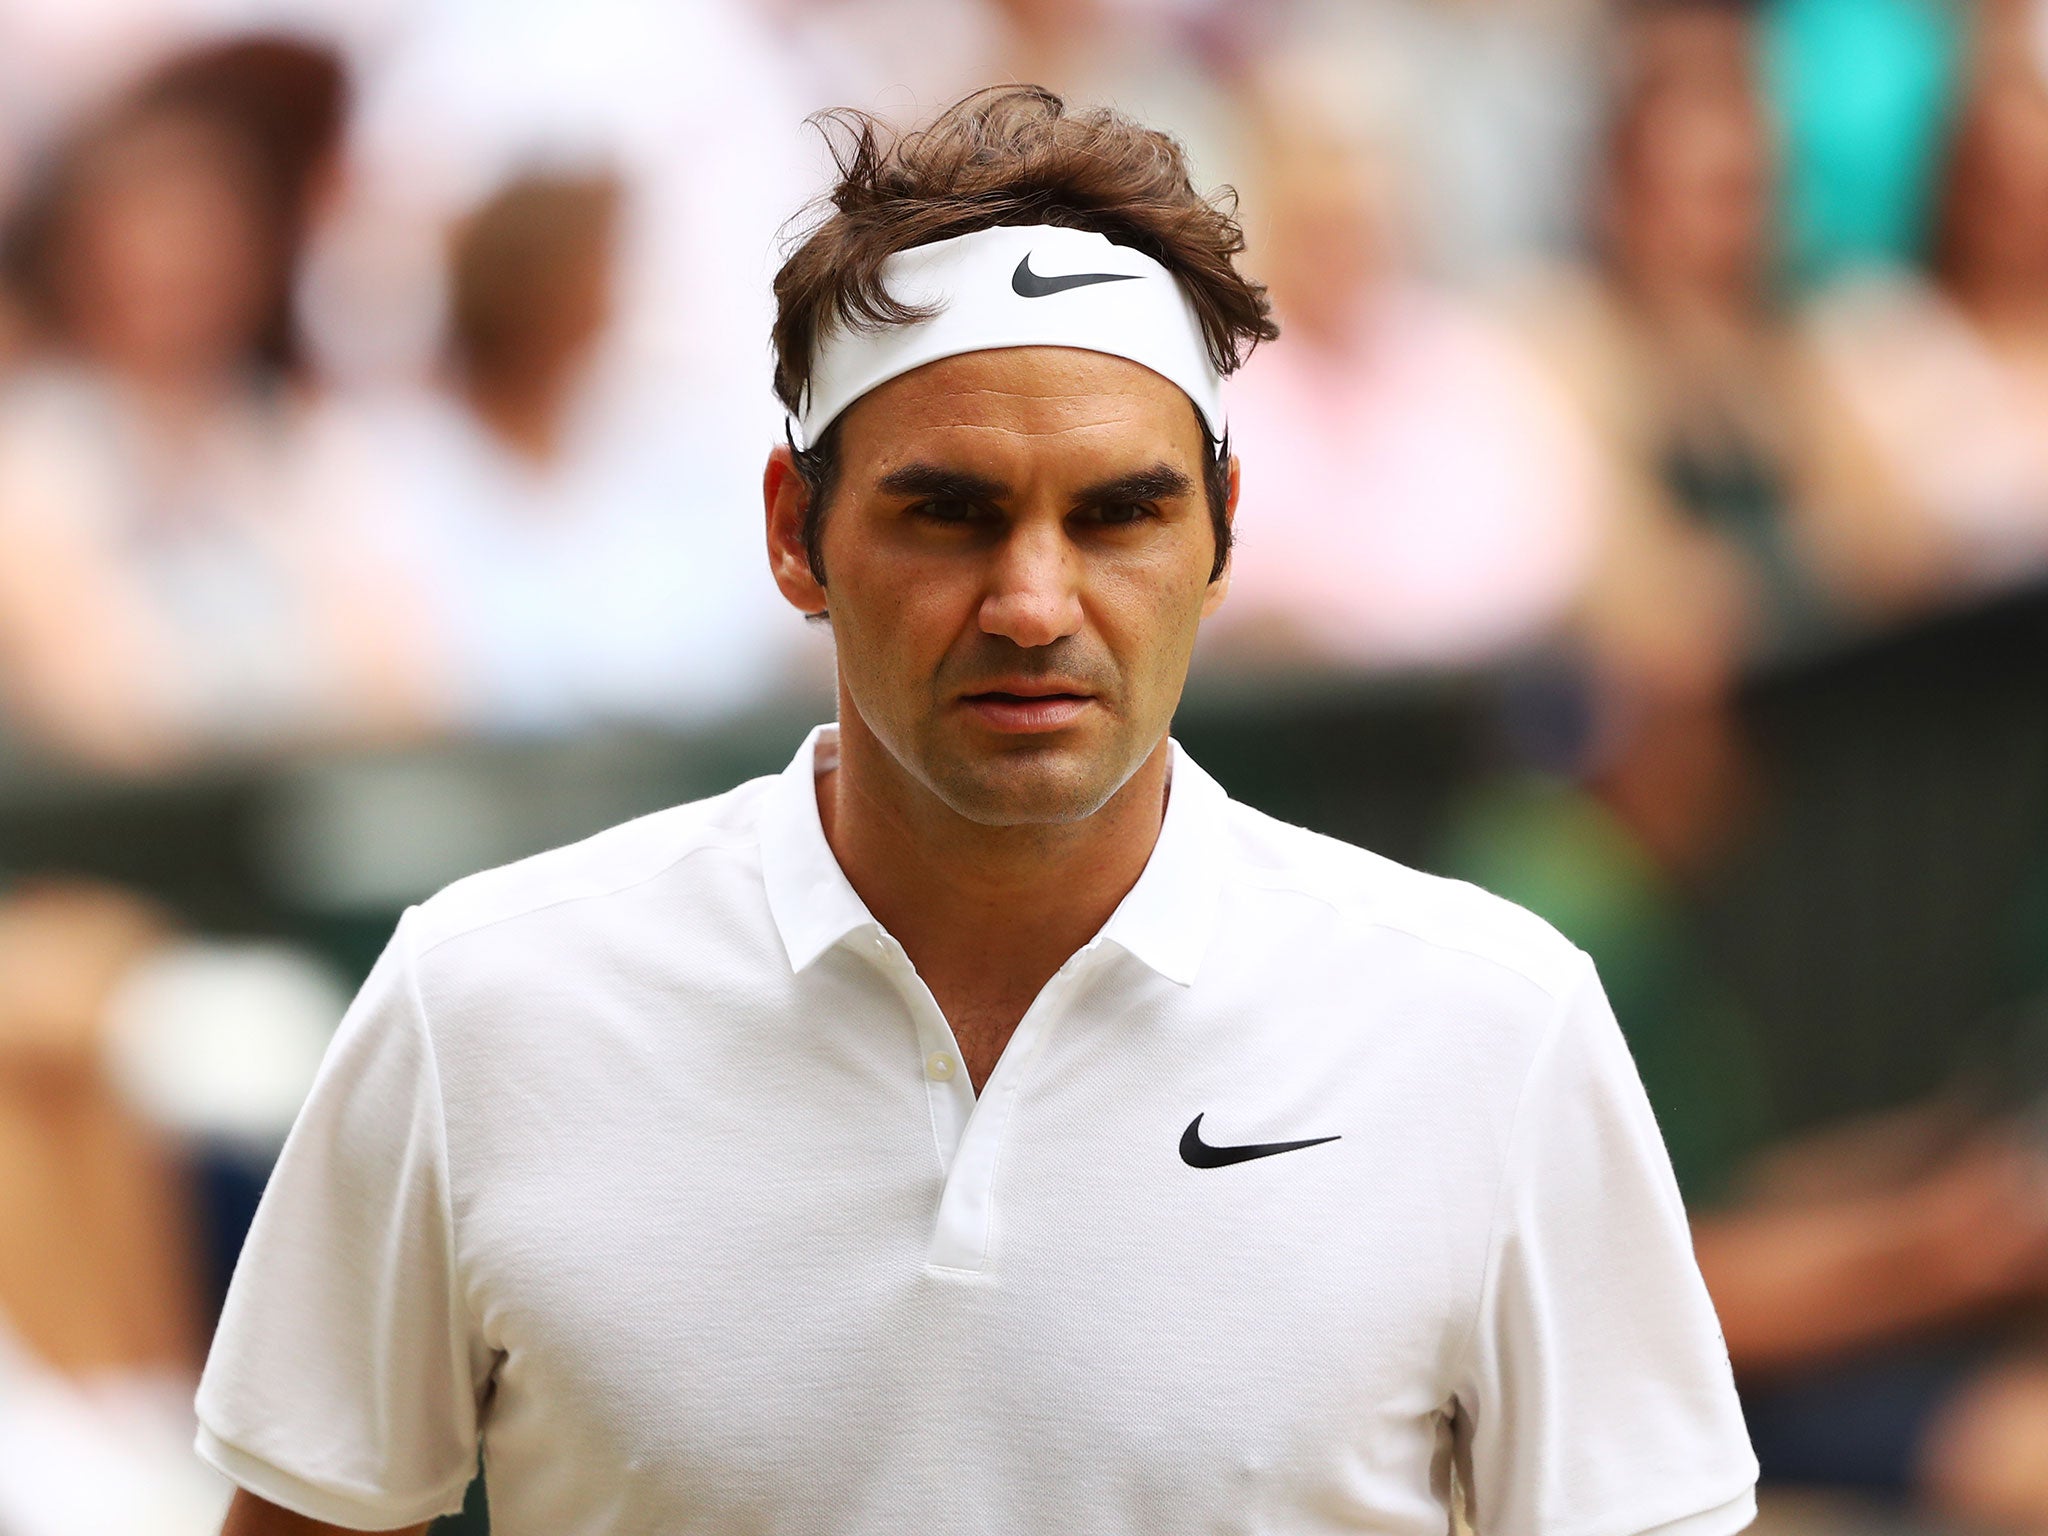 Roger Federer returns to tennis after five months out with a knee injury